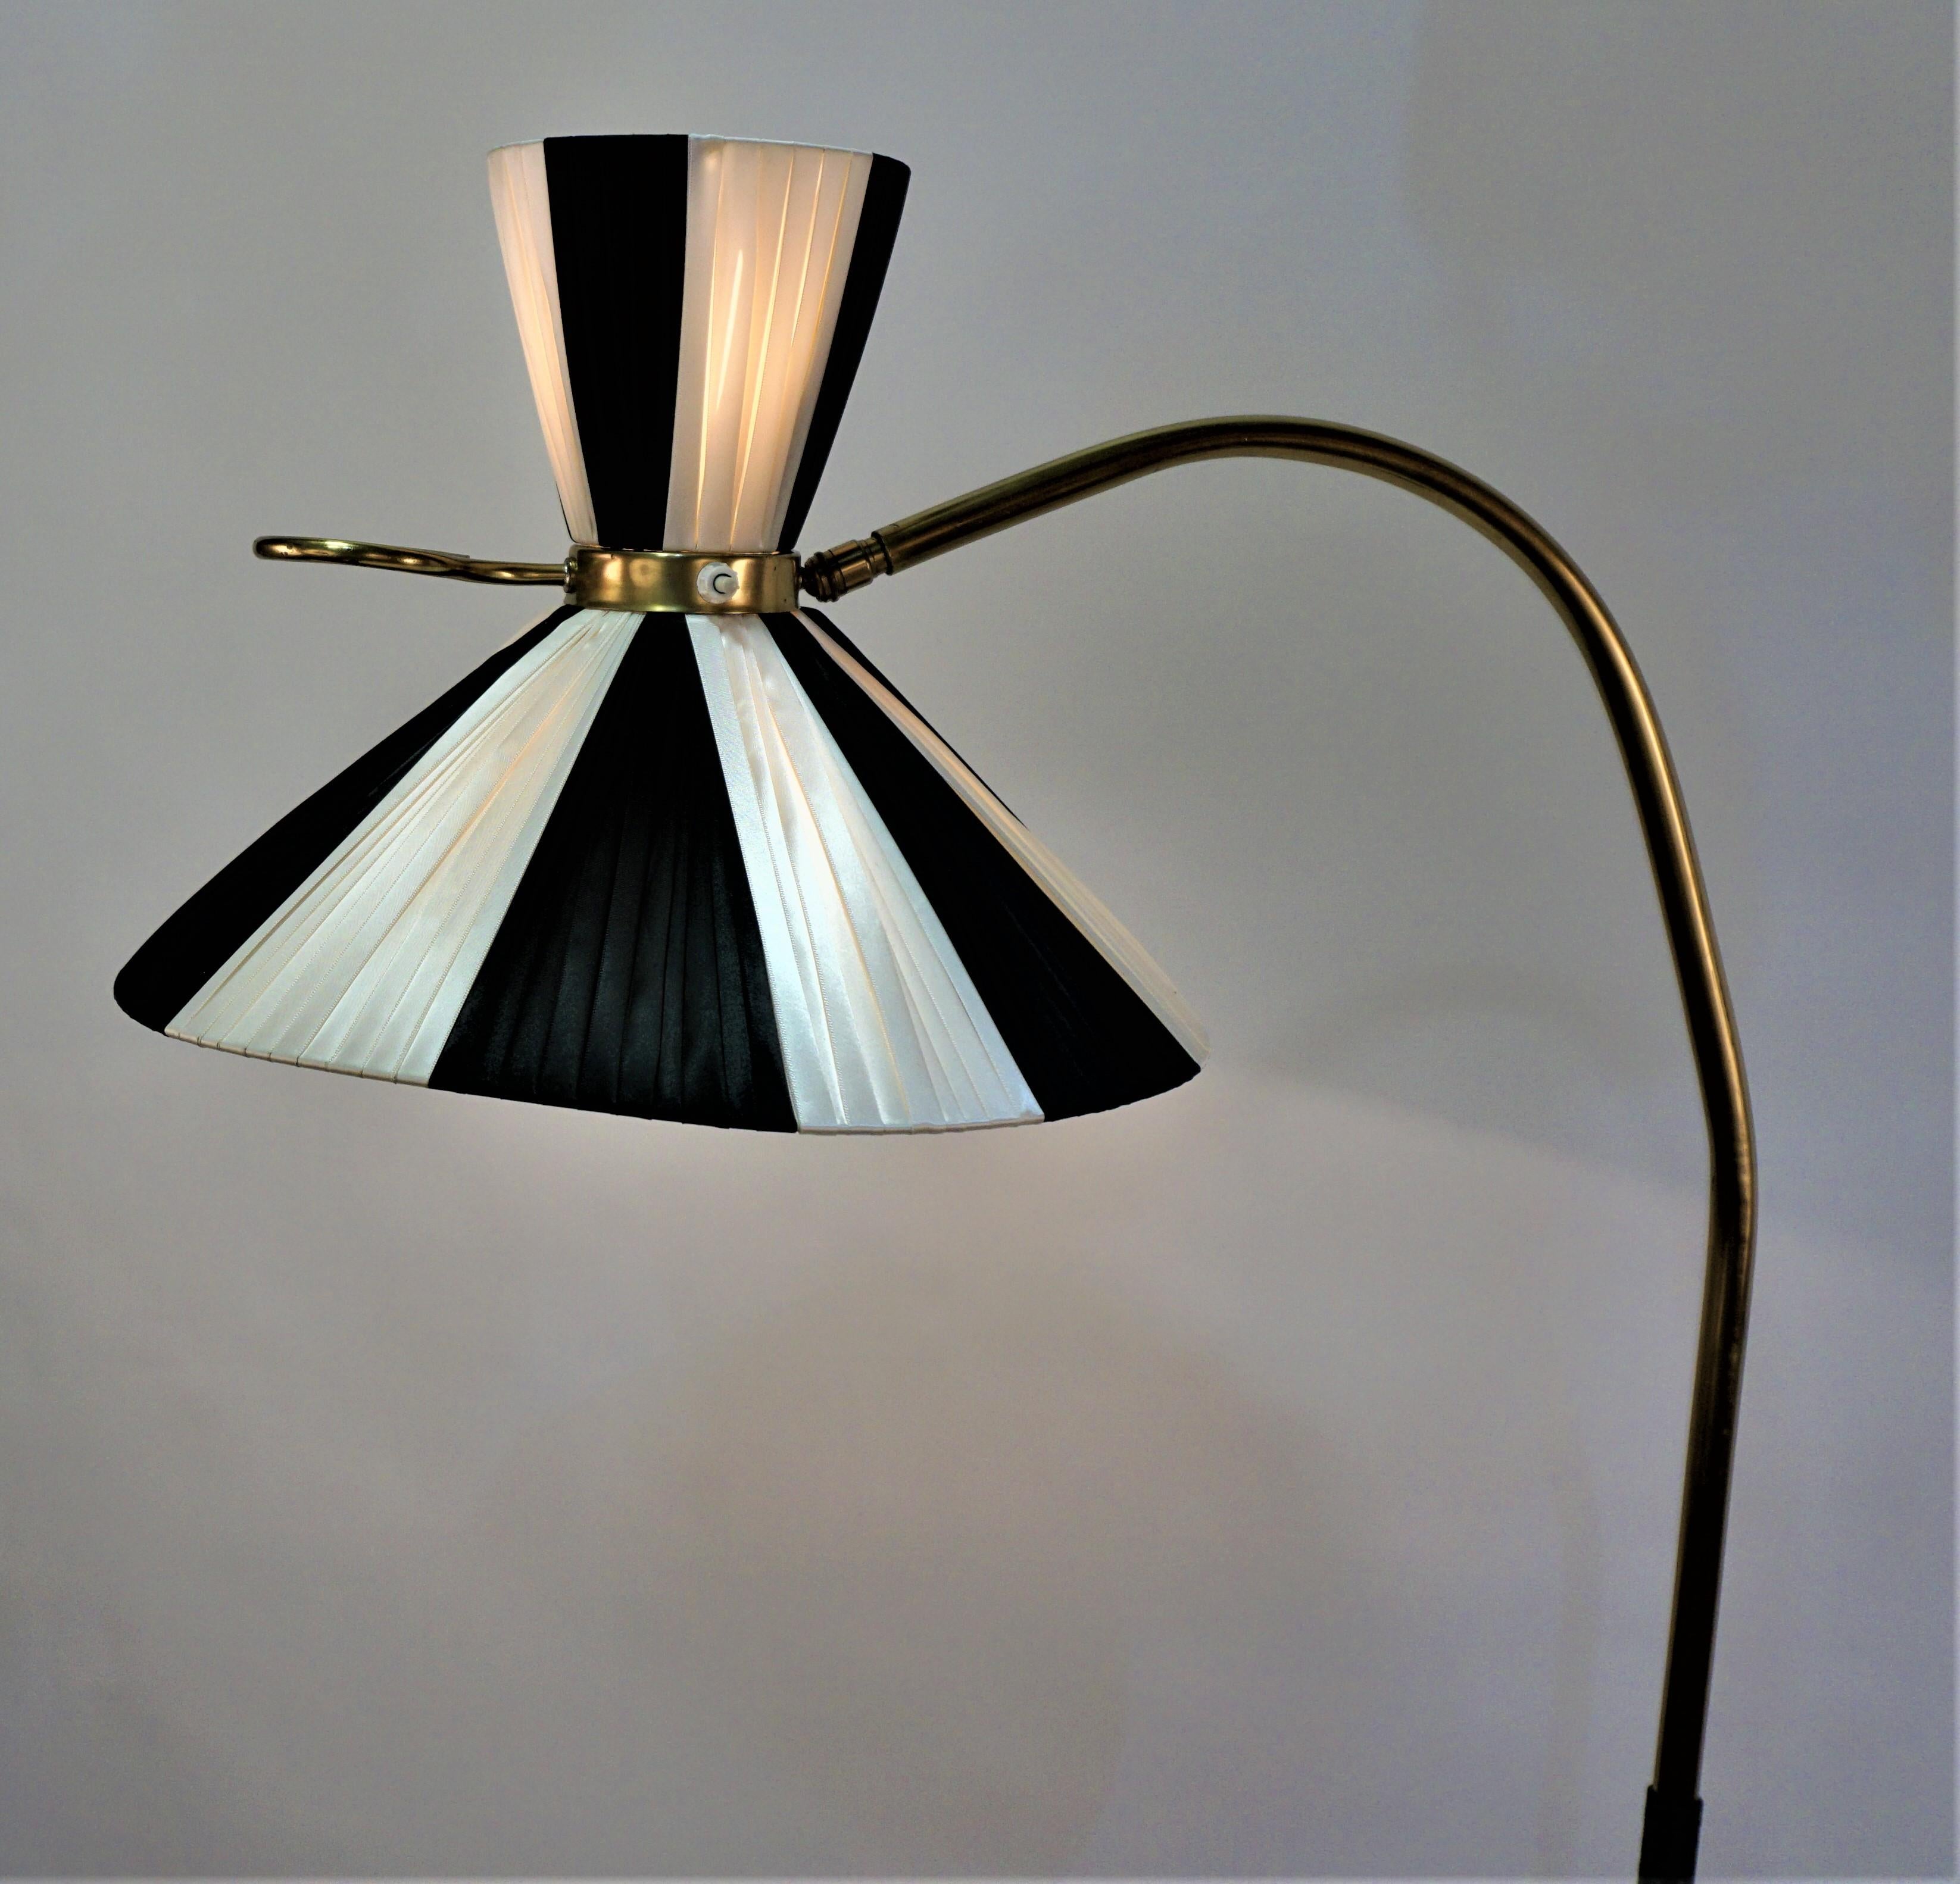 French 1950's bronze adjustable floor lamp from the base and where the shades attaches to the arm.
Original shade frame with new the same design wrapped fabric.